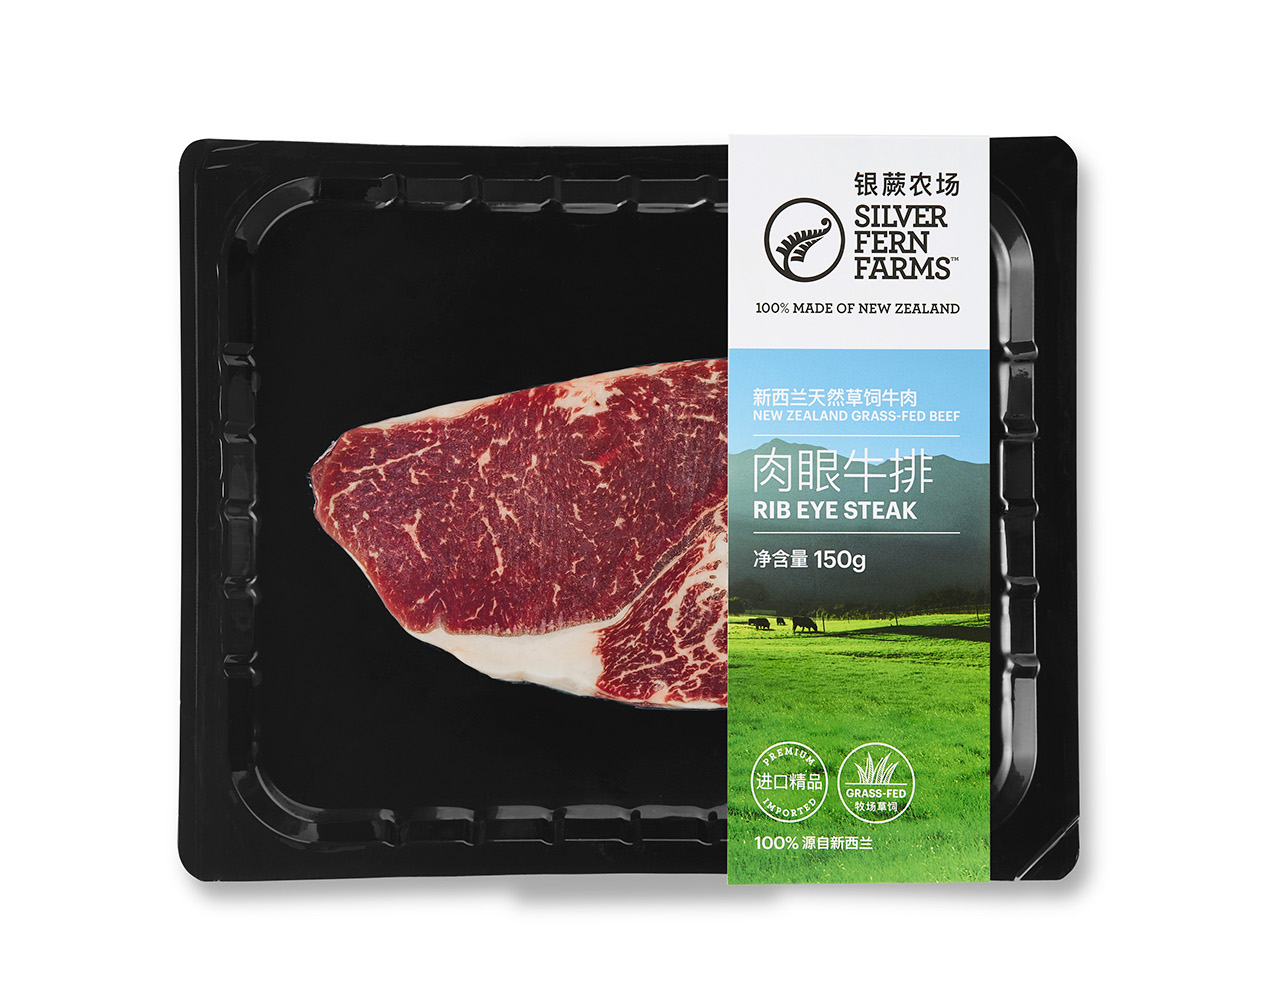 Image or China retail pack for beef